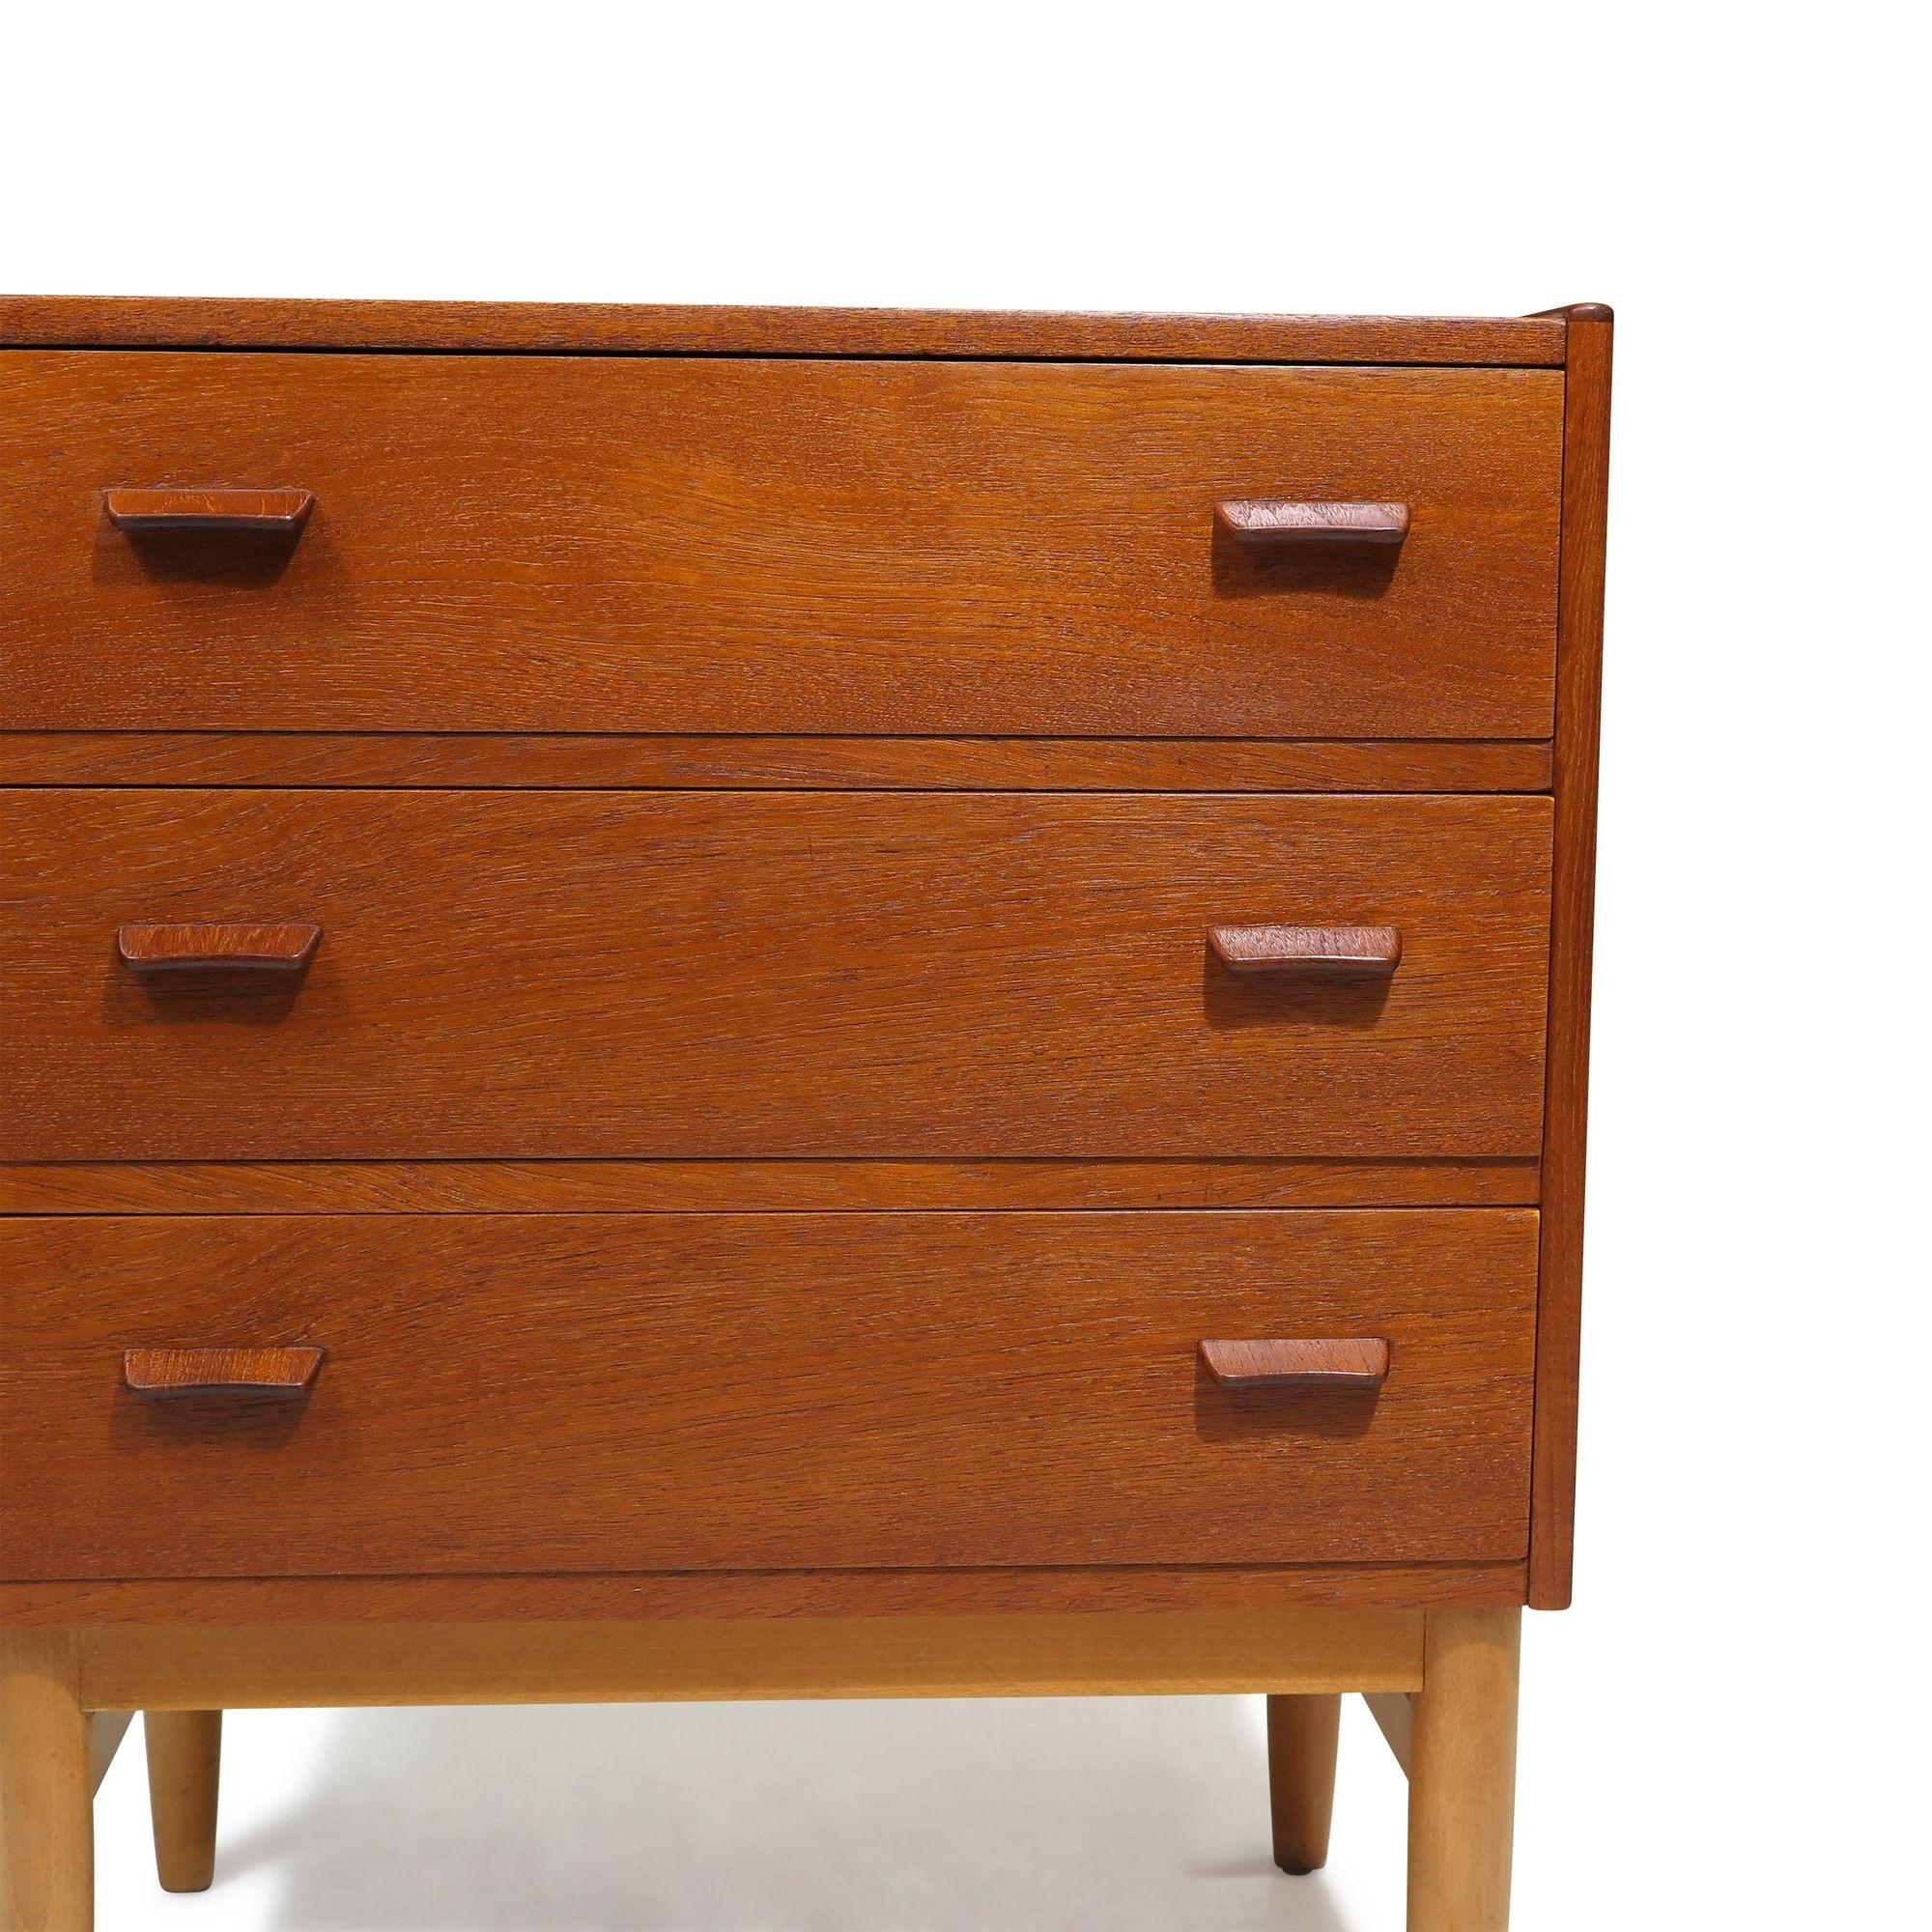 Pair of Mid-century Danish teak nightstand cabinets designed by Poul M. Volther for FDB Møbelfabrik, 1958, Denmark. Crafted from teak, each cabinet features three drawers with carved pulls and is raised on solid beech legs. Each stamped with model